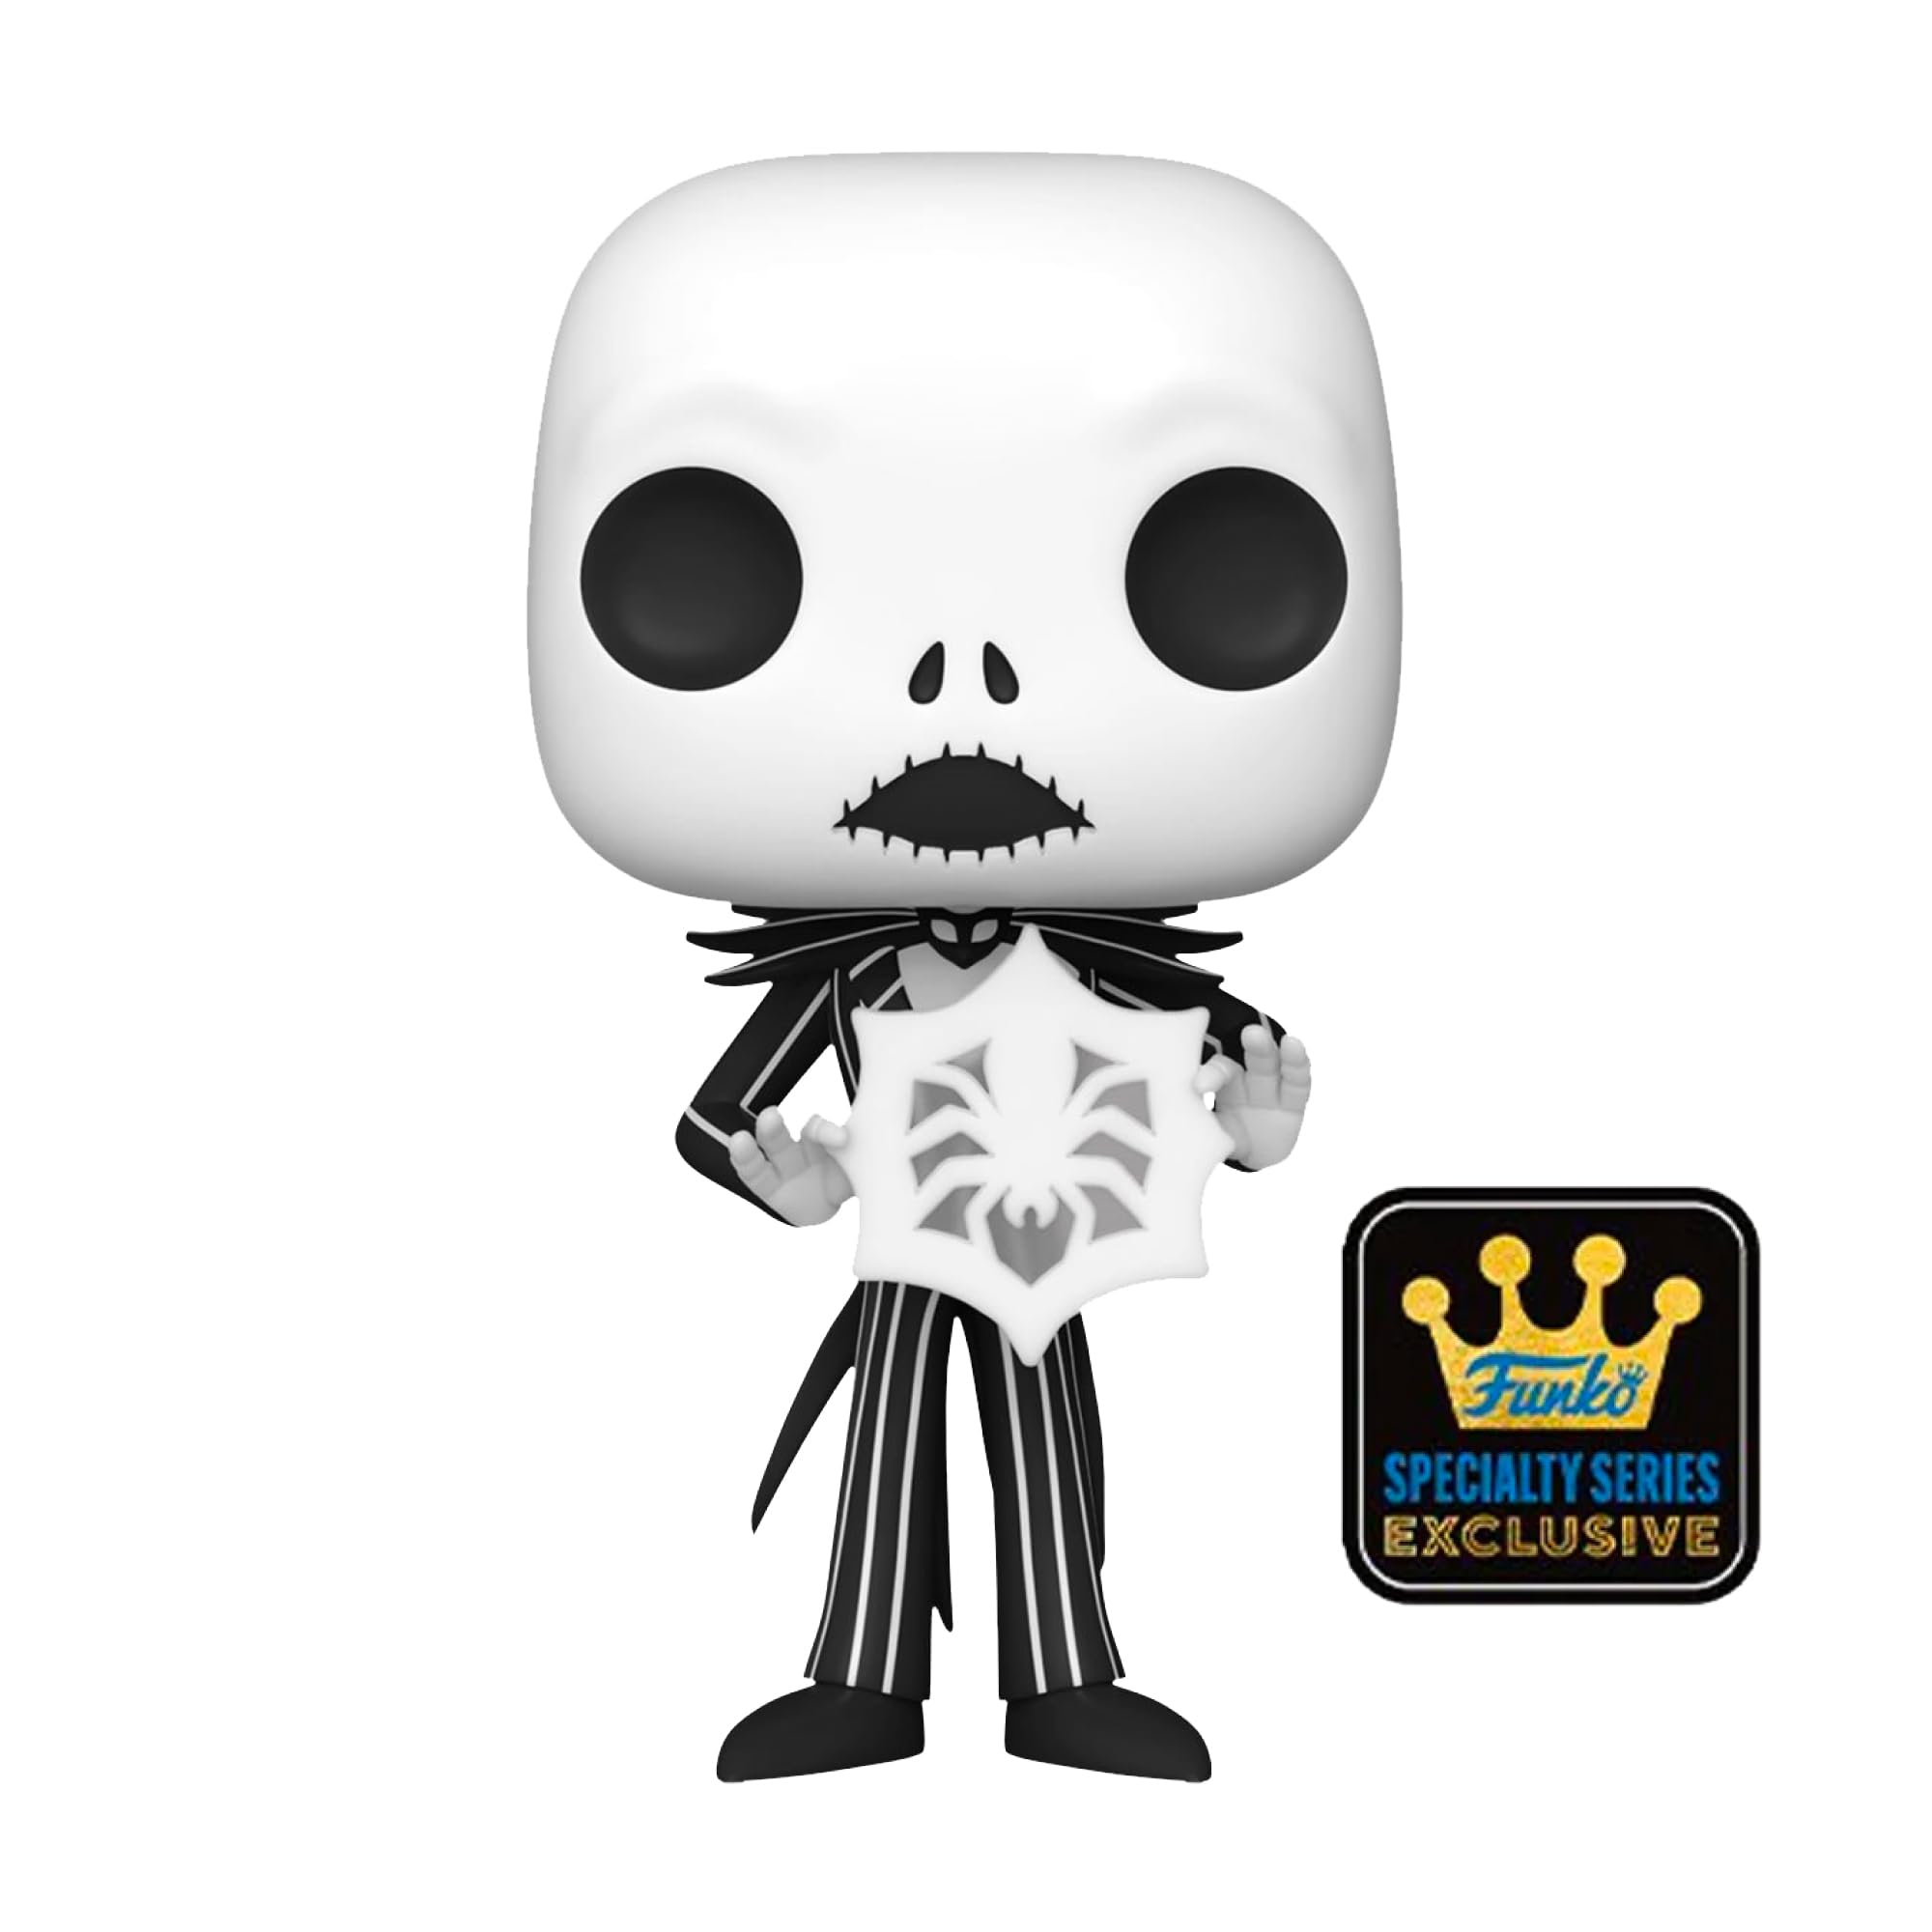 Blue Salamander Emporium Protective Case Bundled with Vinyl Figure – The Nightmare Before Christmas 30th Anniversary – Jack Skellington with Snowflake #1385 Specialty Series